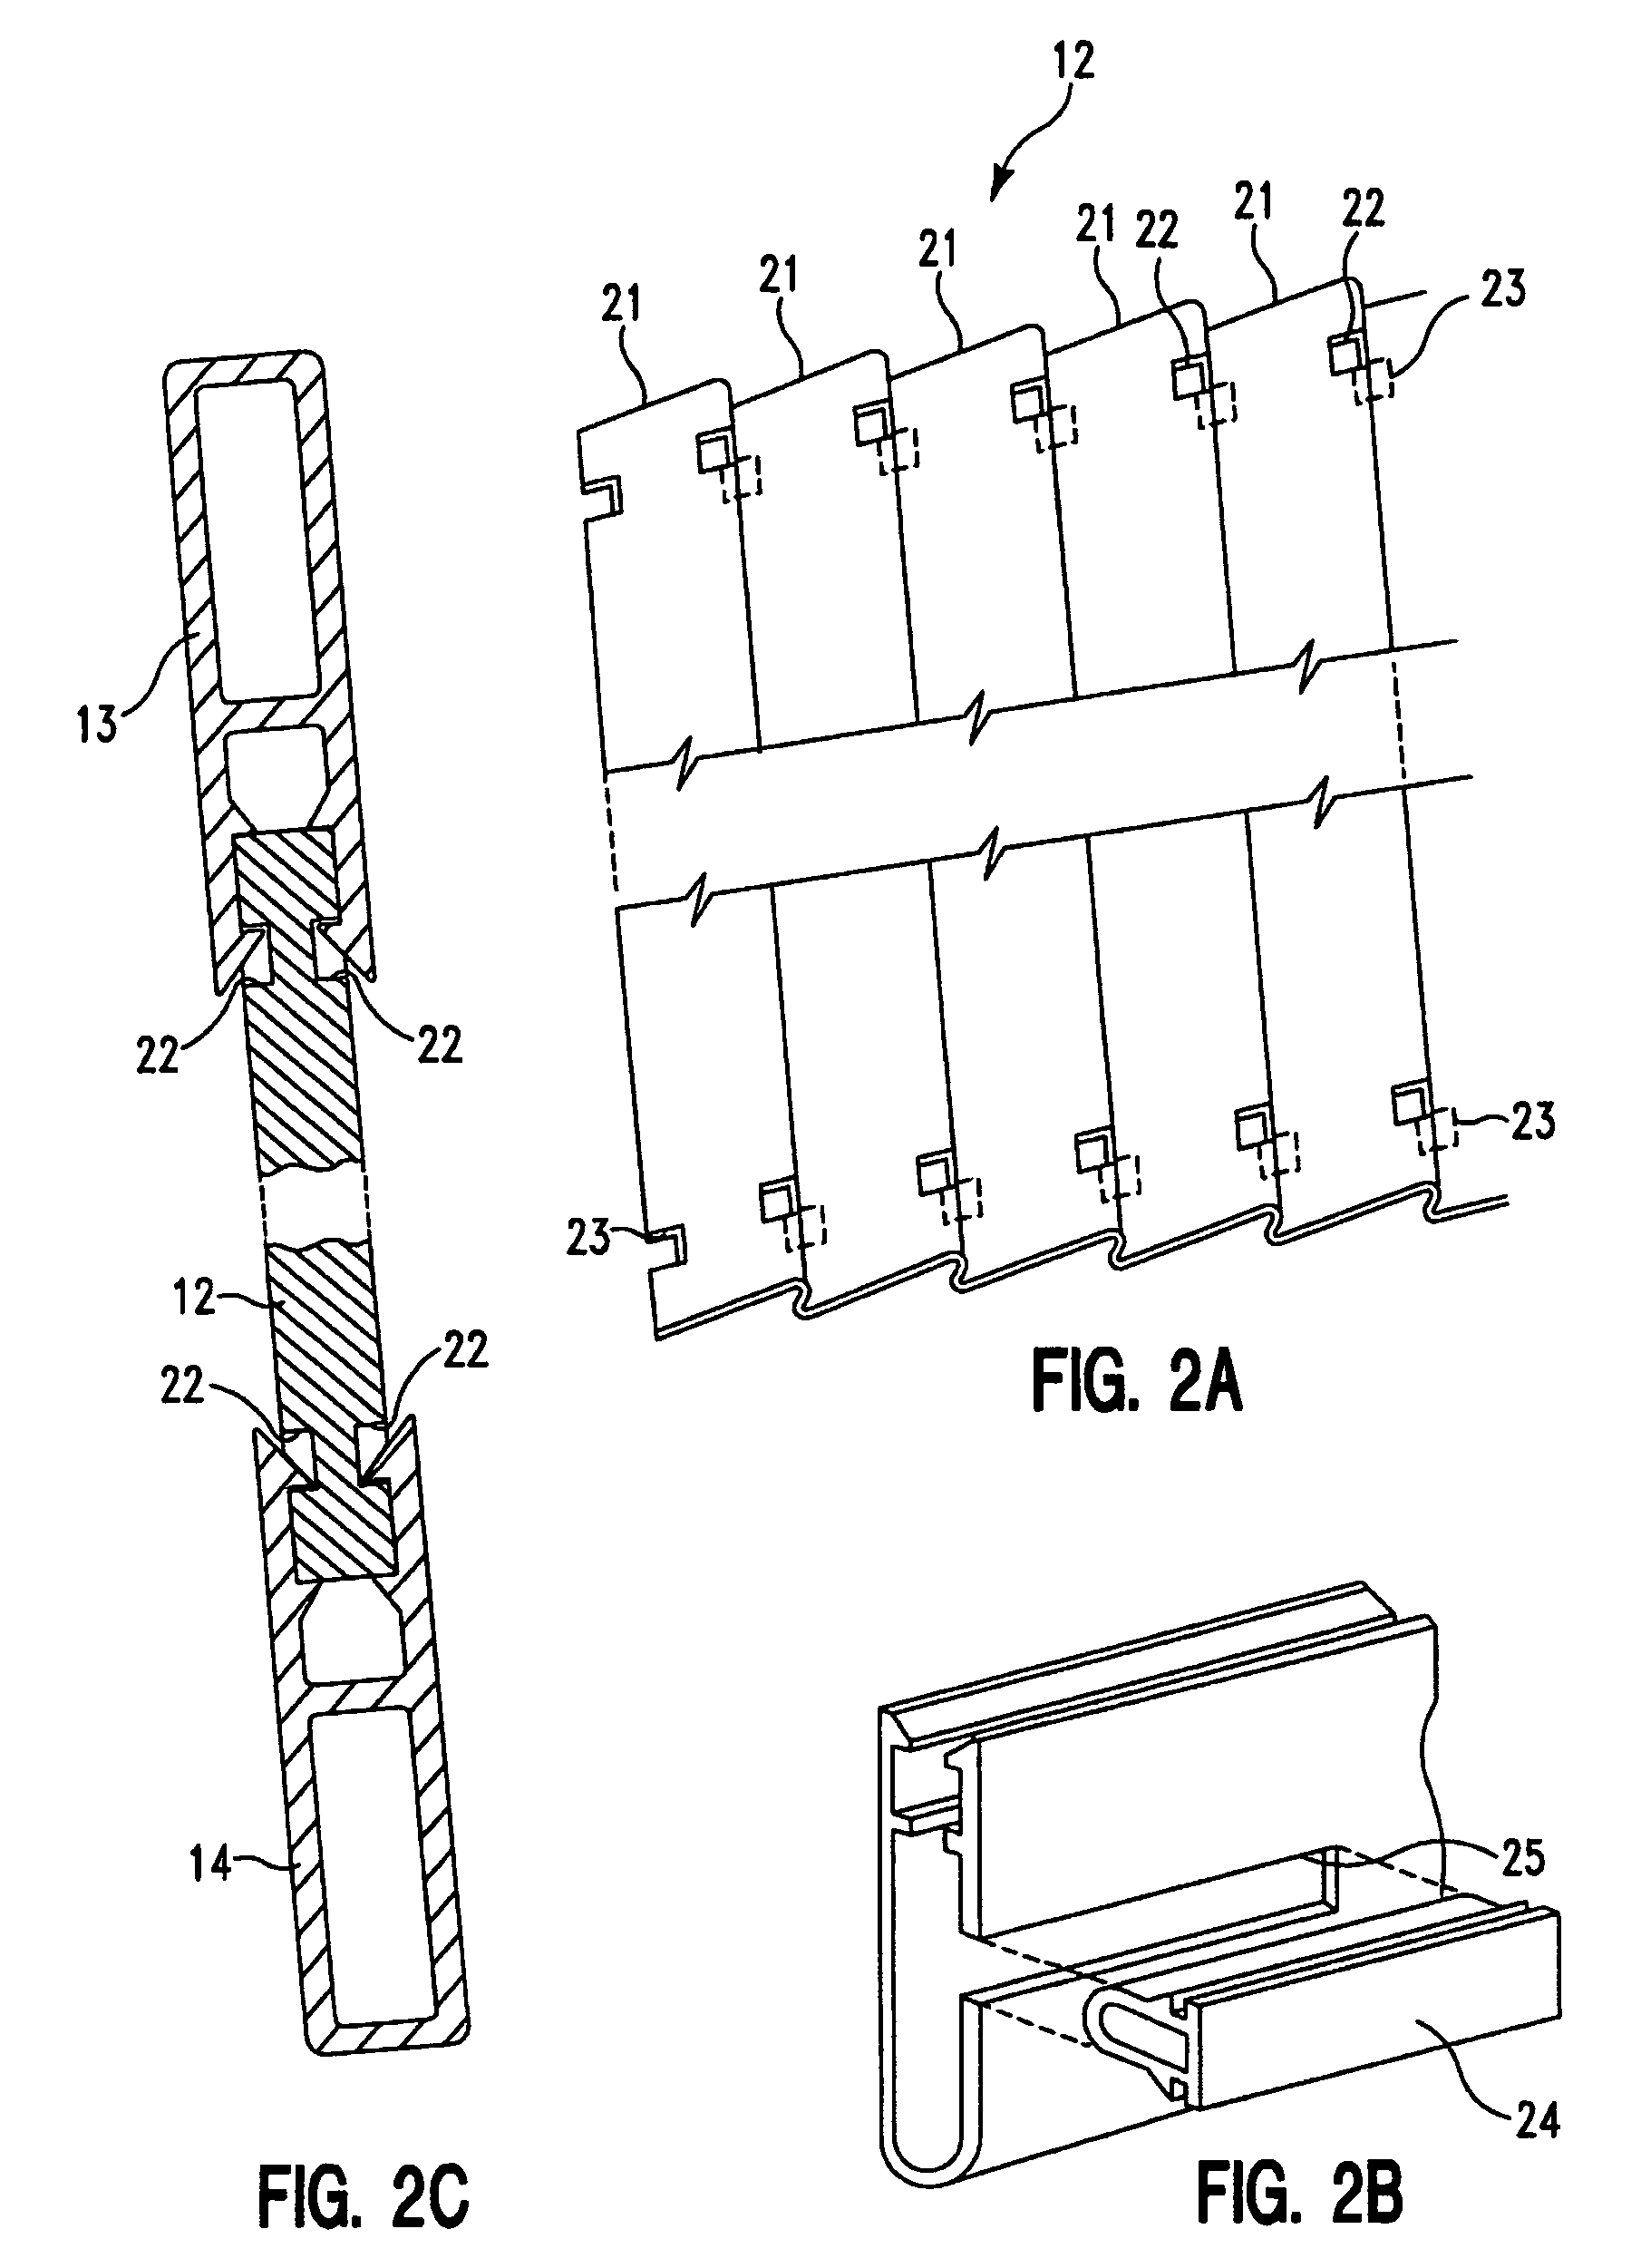 Flexible fence assembly